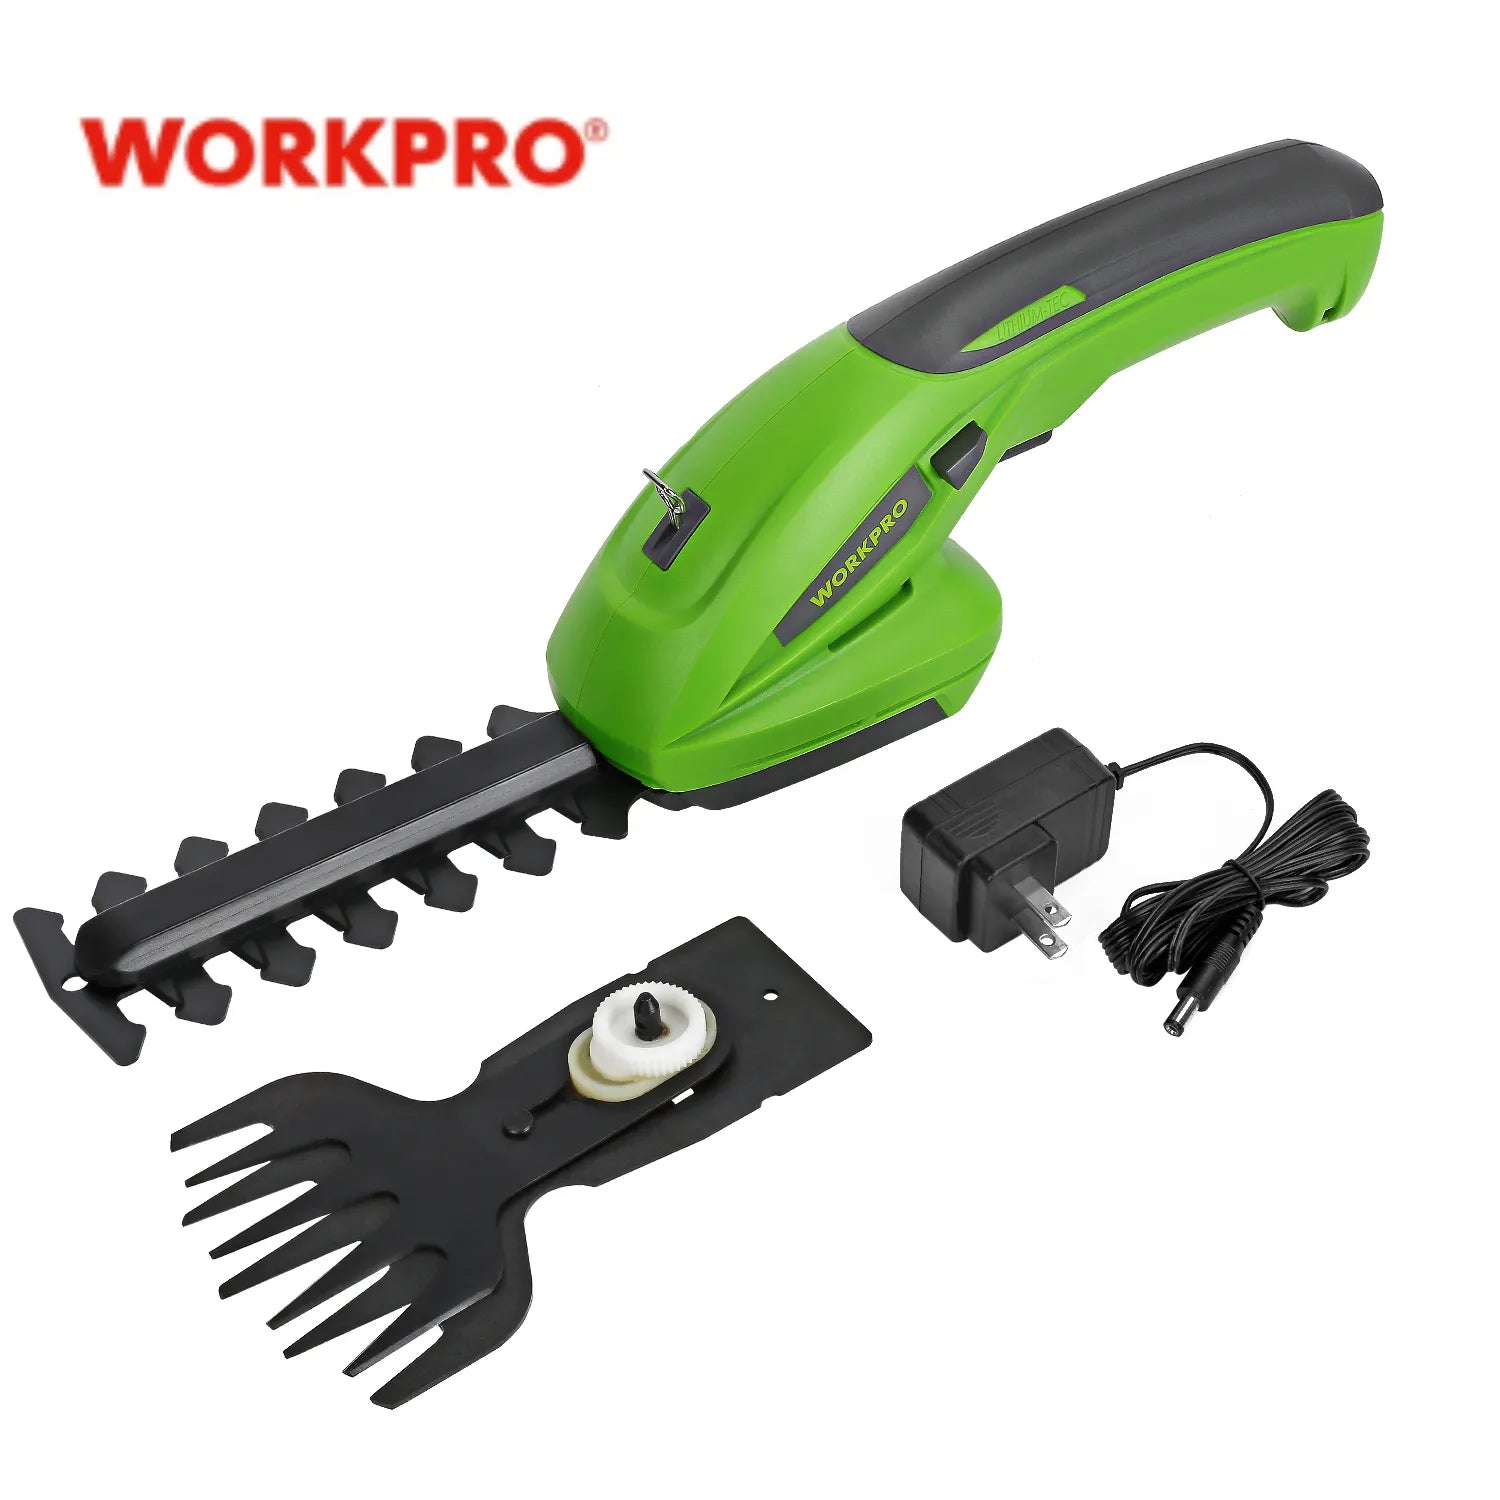 WORKPRO 3.6-7.2V Electric Trimmer 2 in 1 Lithium-ion Cordless Garden Tools Hedge Trimmer Rechargeable Hedge Trimmers for Grass